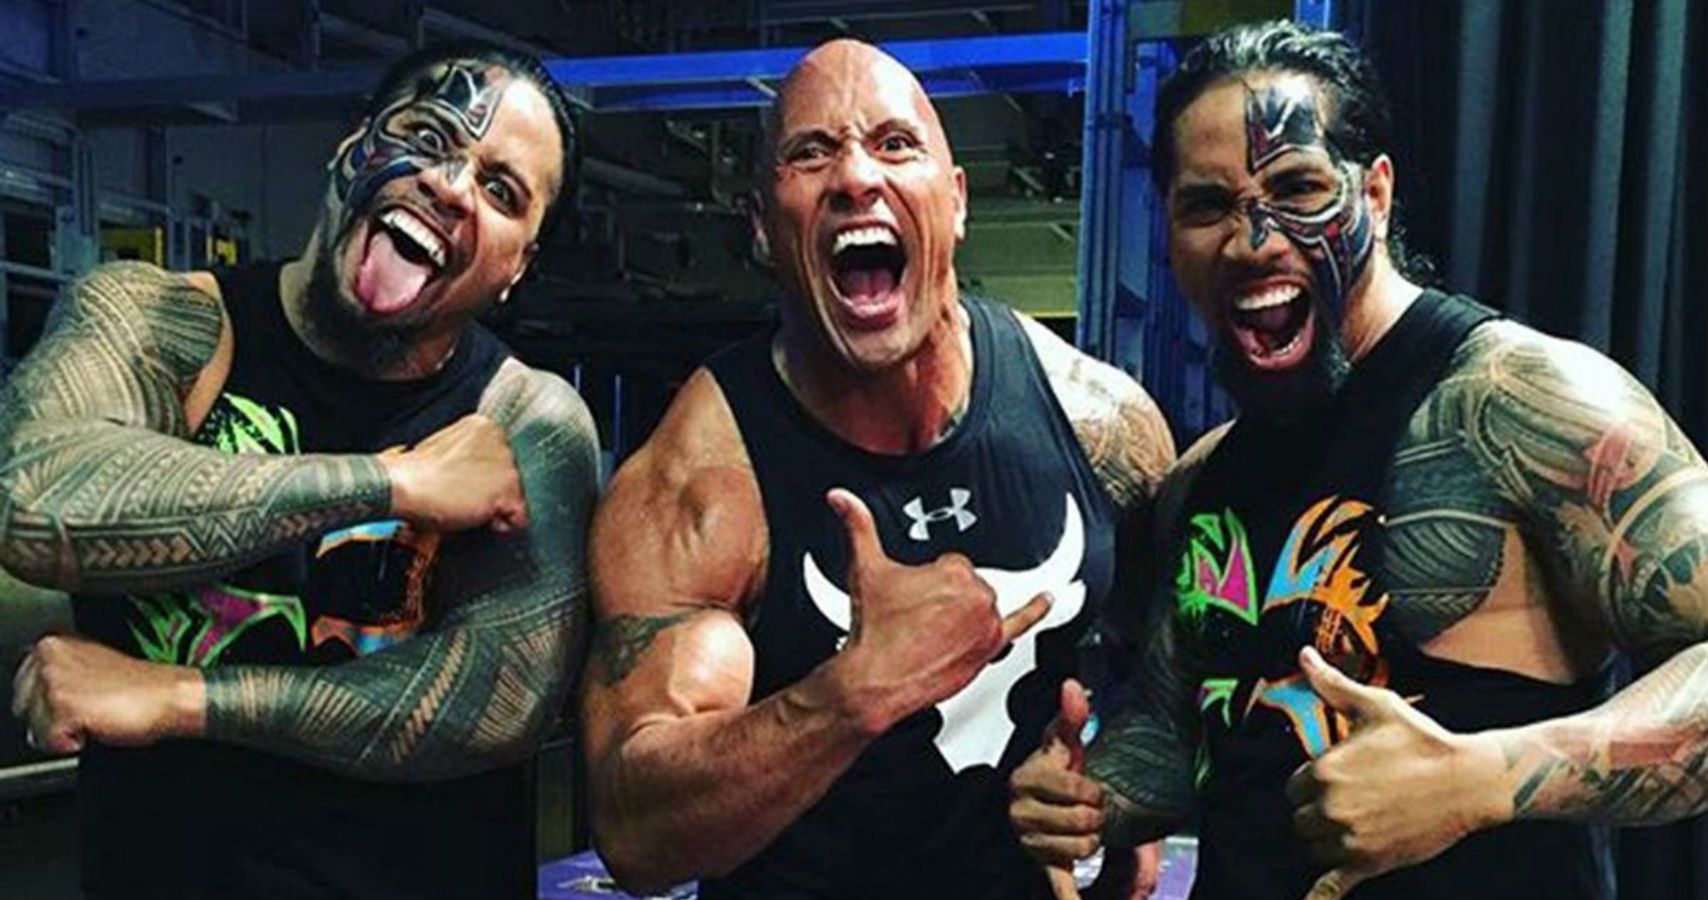 The Usos and The Rock